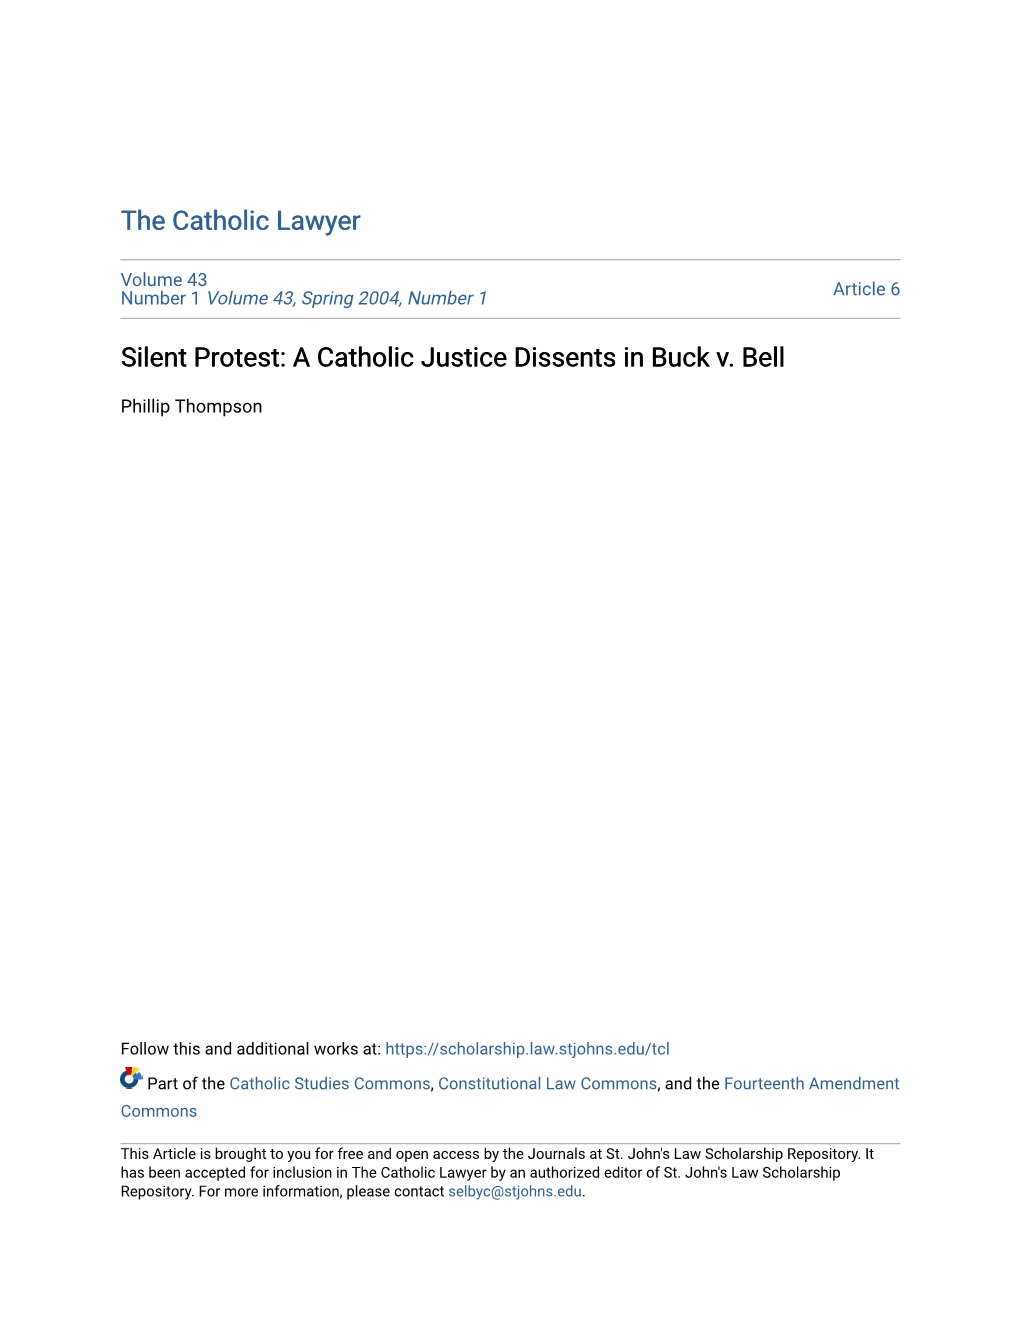 A Catholic Justice Dissents in Buck V. Bell